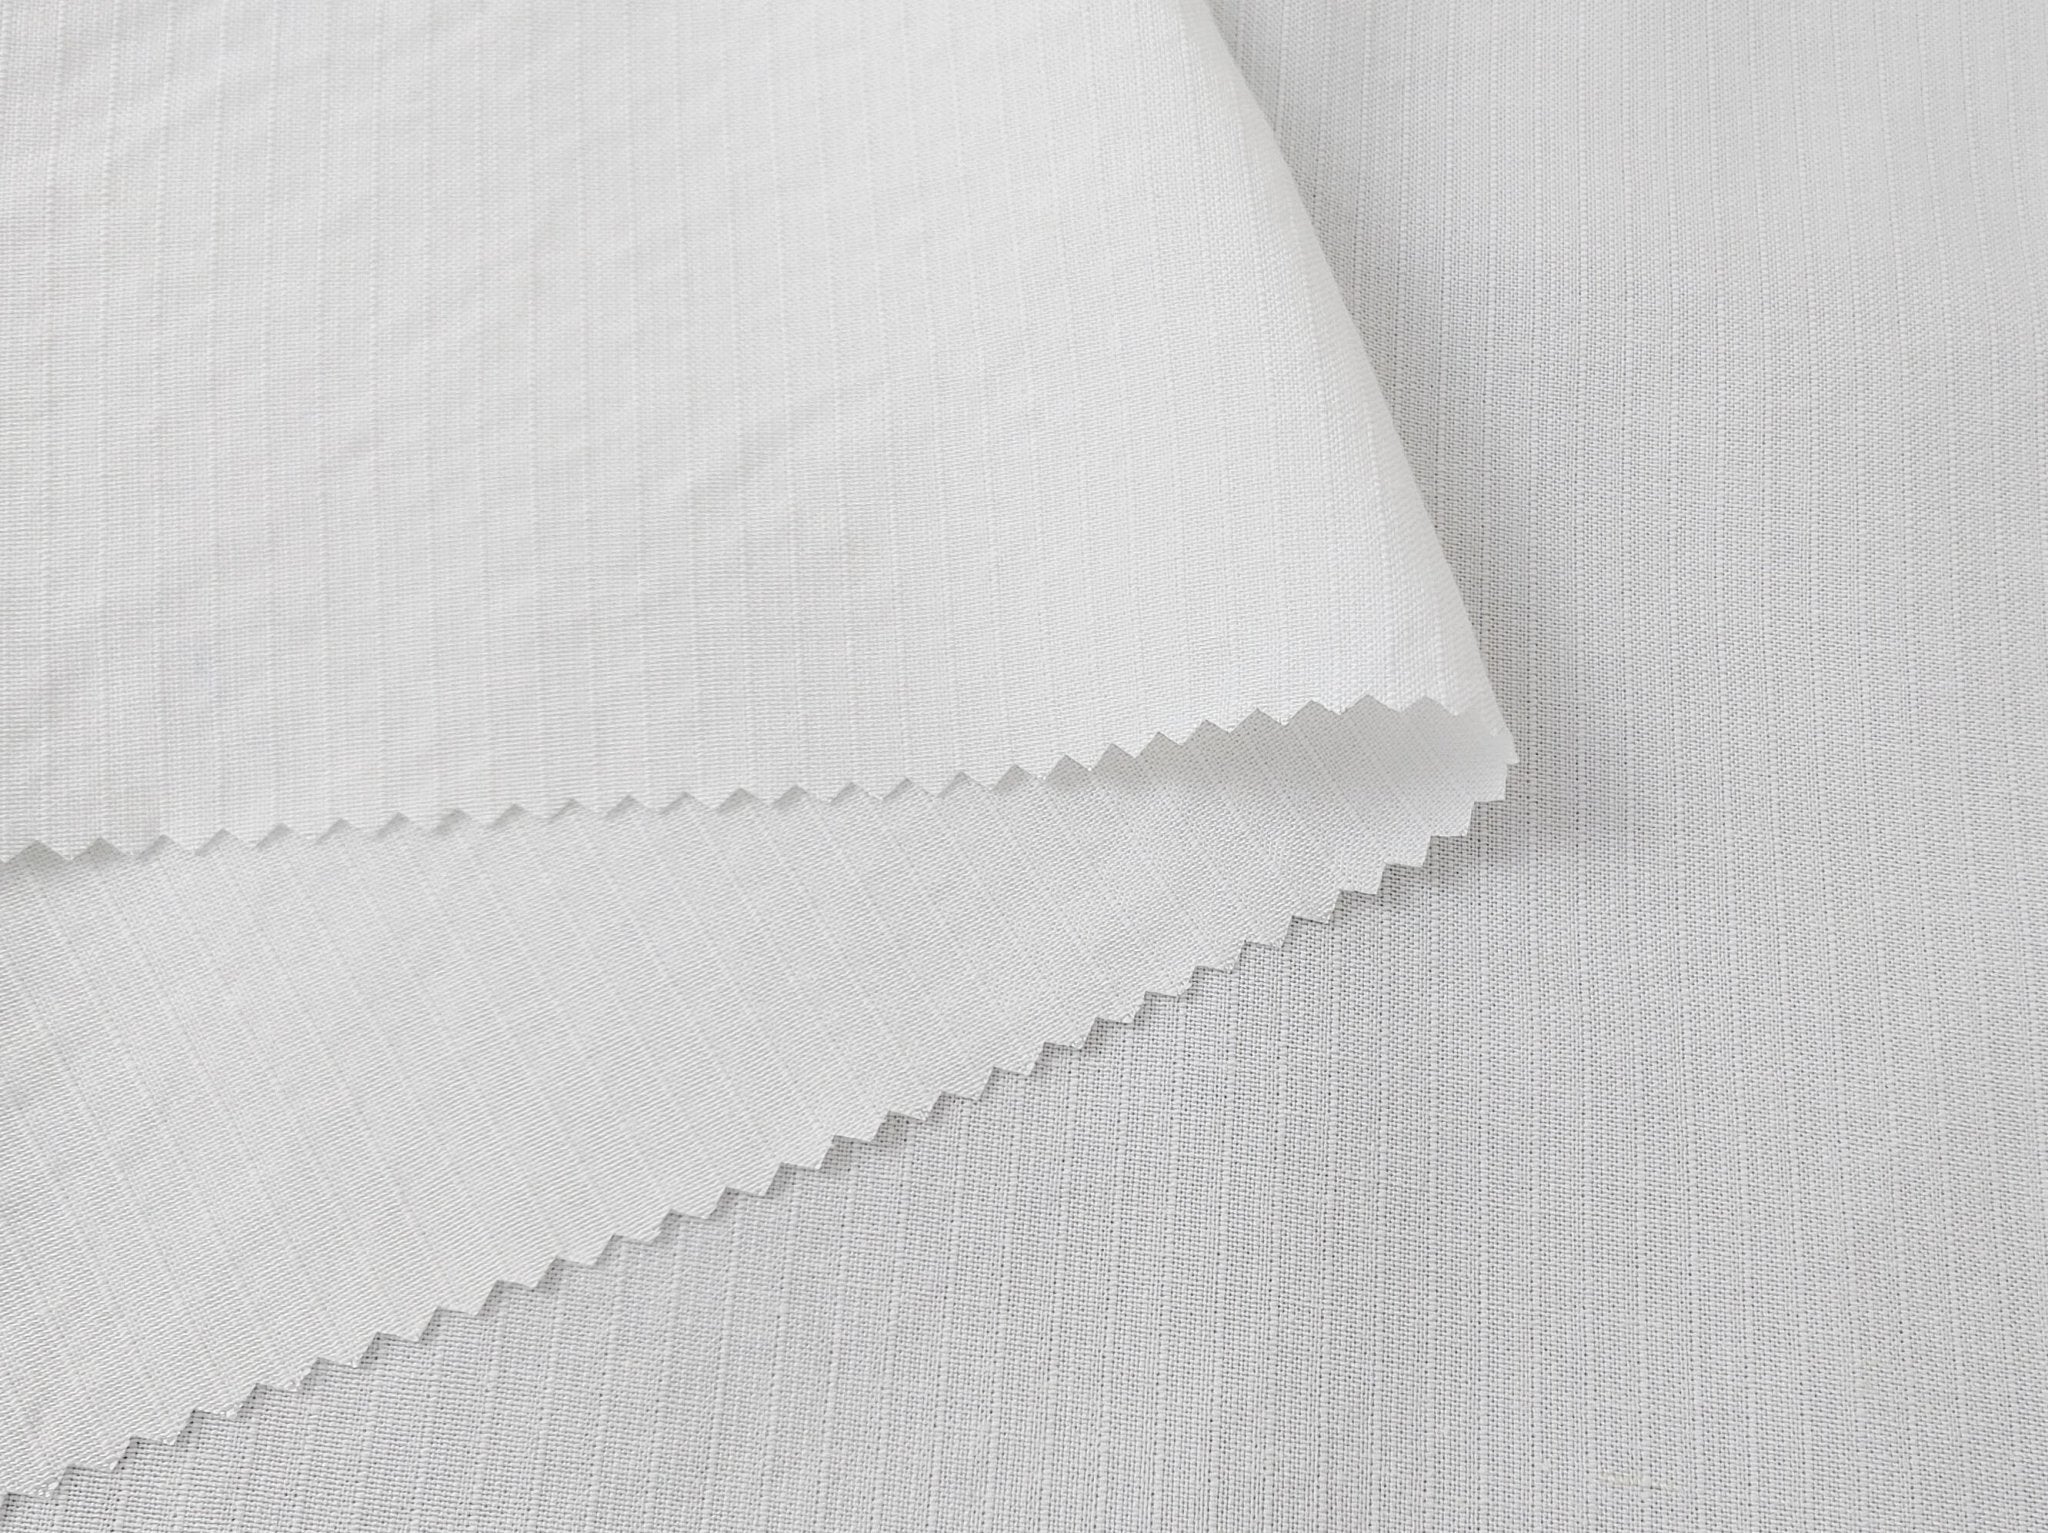 White Linen-Rayon Fabric with Delicate Stripes and Subtle Wrinkle Effect 7648 - The Linen Lab - White